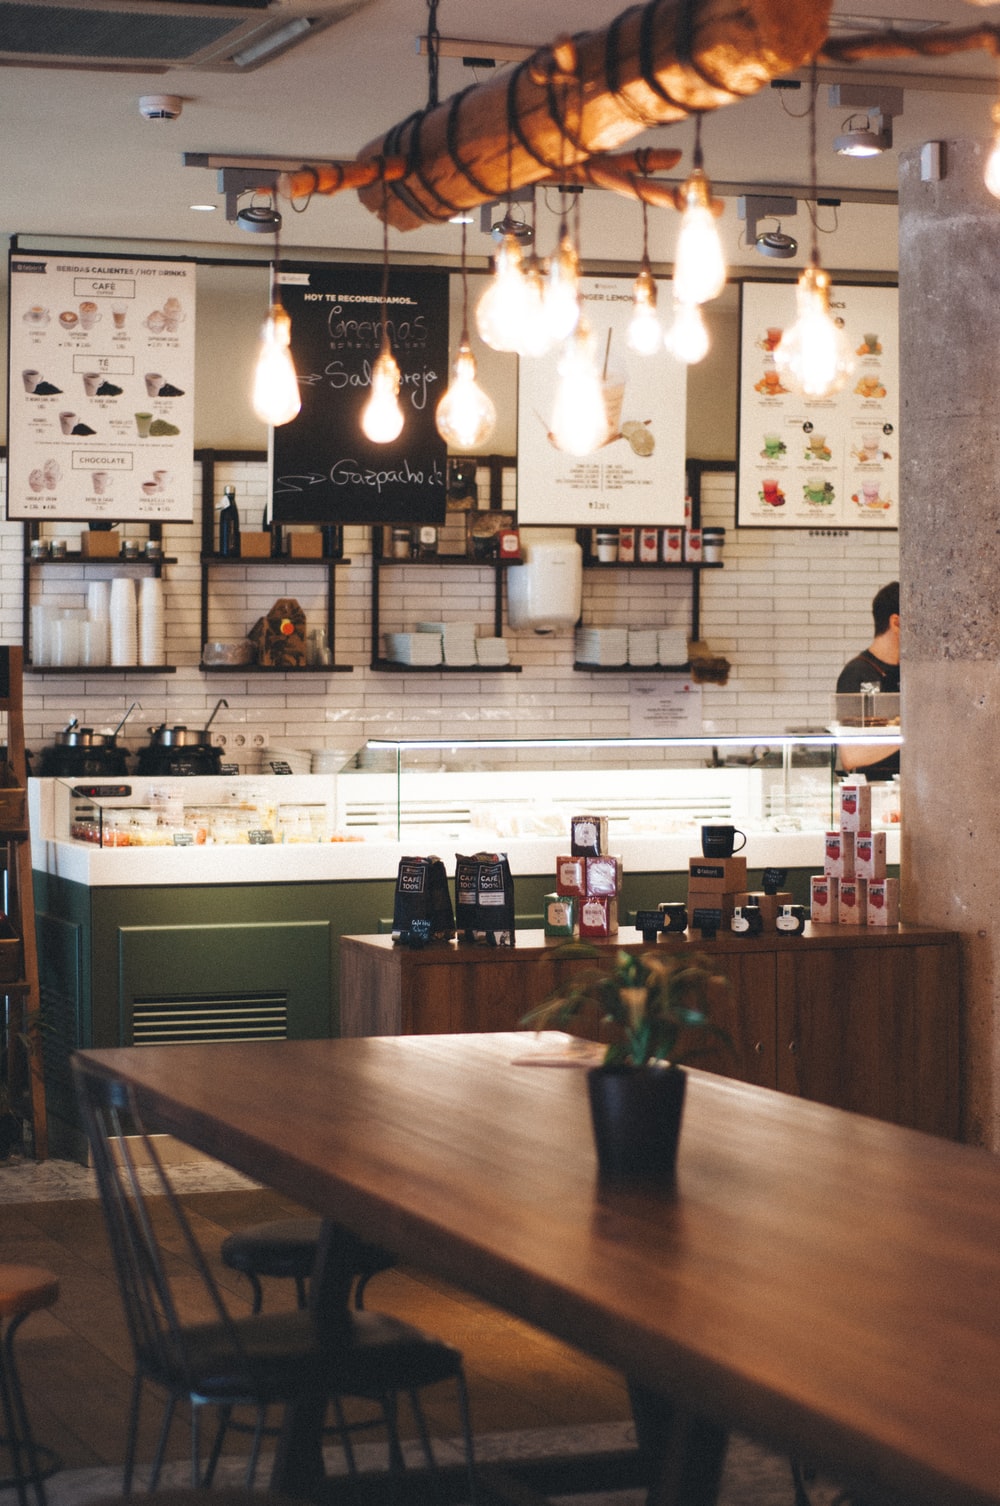 Coffee Shop Picture. Download Free Image